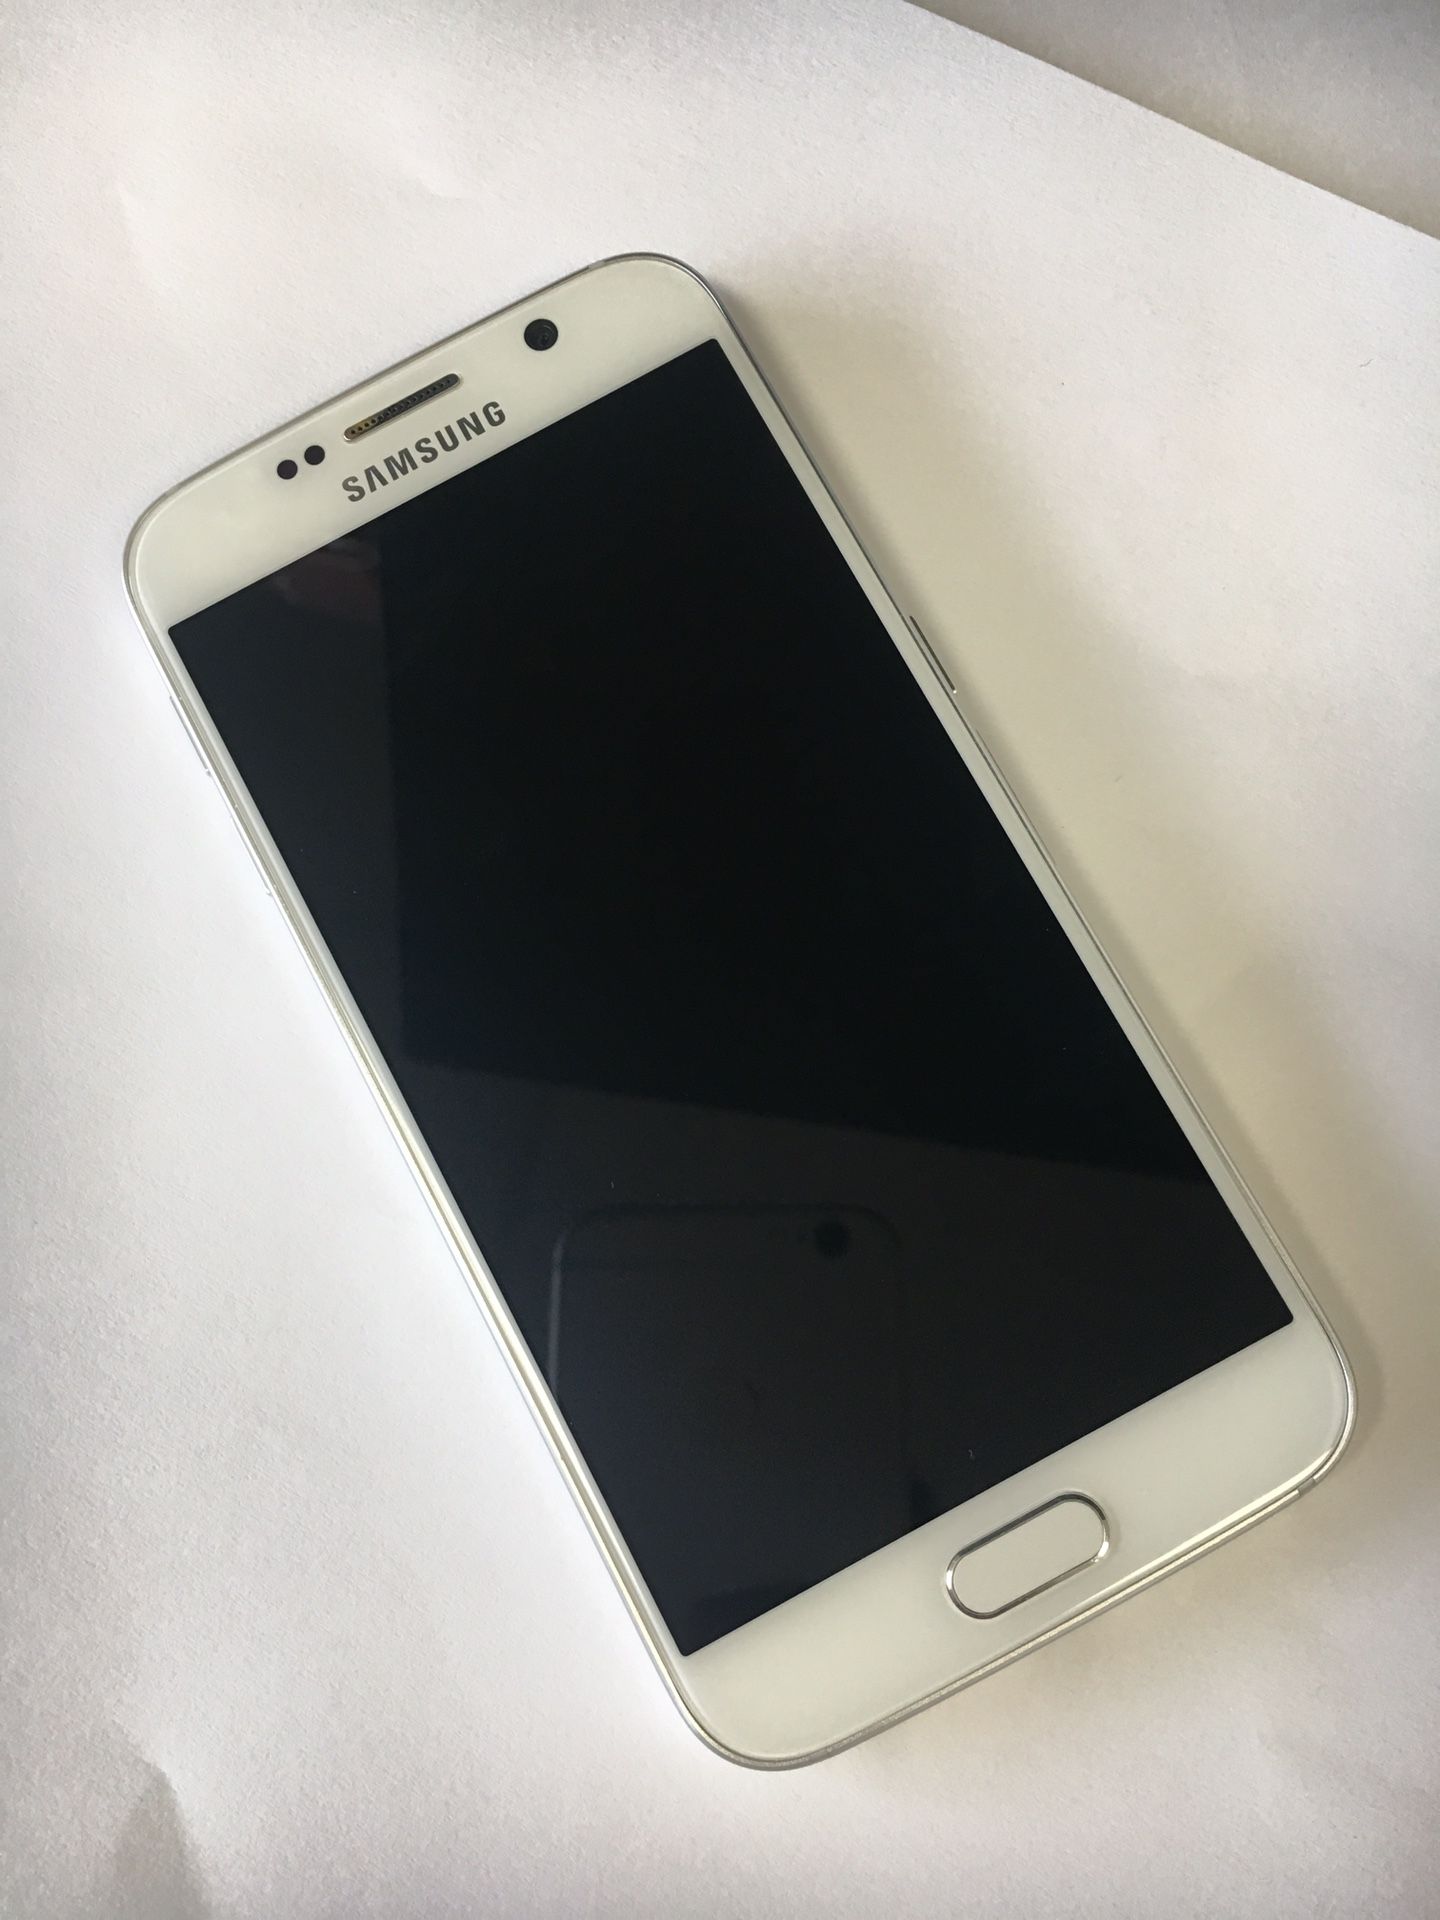 Samsung galaxy S6 excellent condition factory unlocked comes with charger